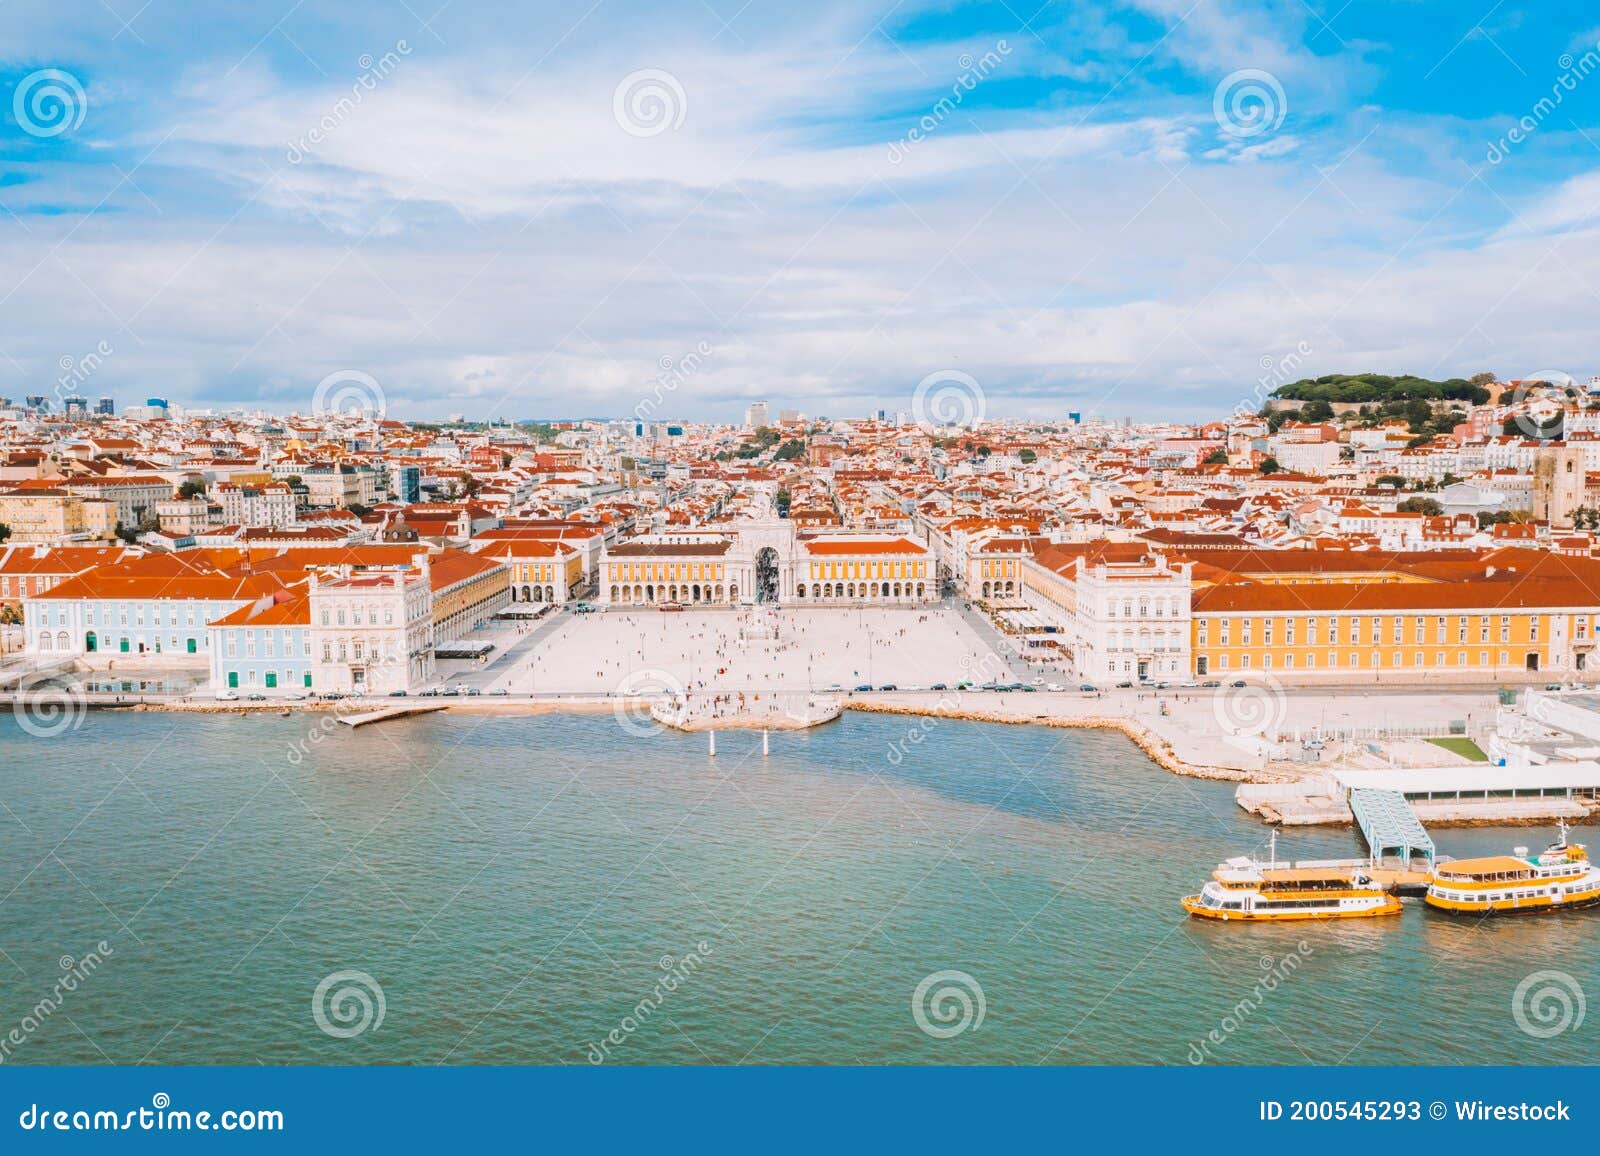 aerial view of the famous praca do comercio (commerce square) in lisbon, portugal